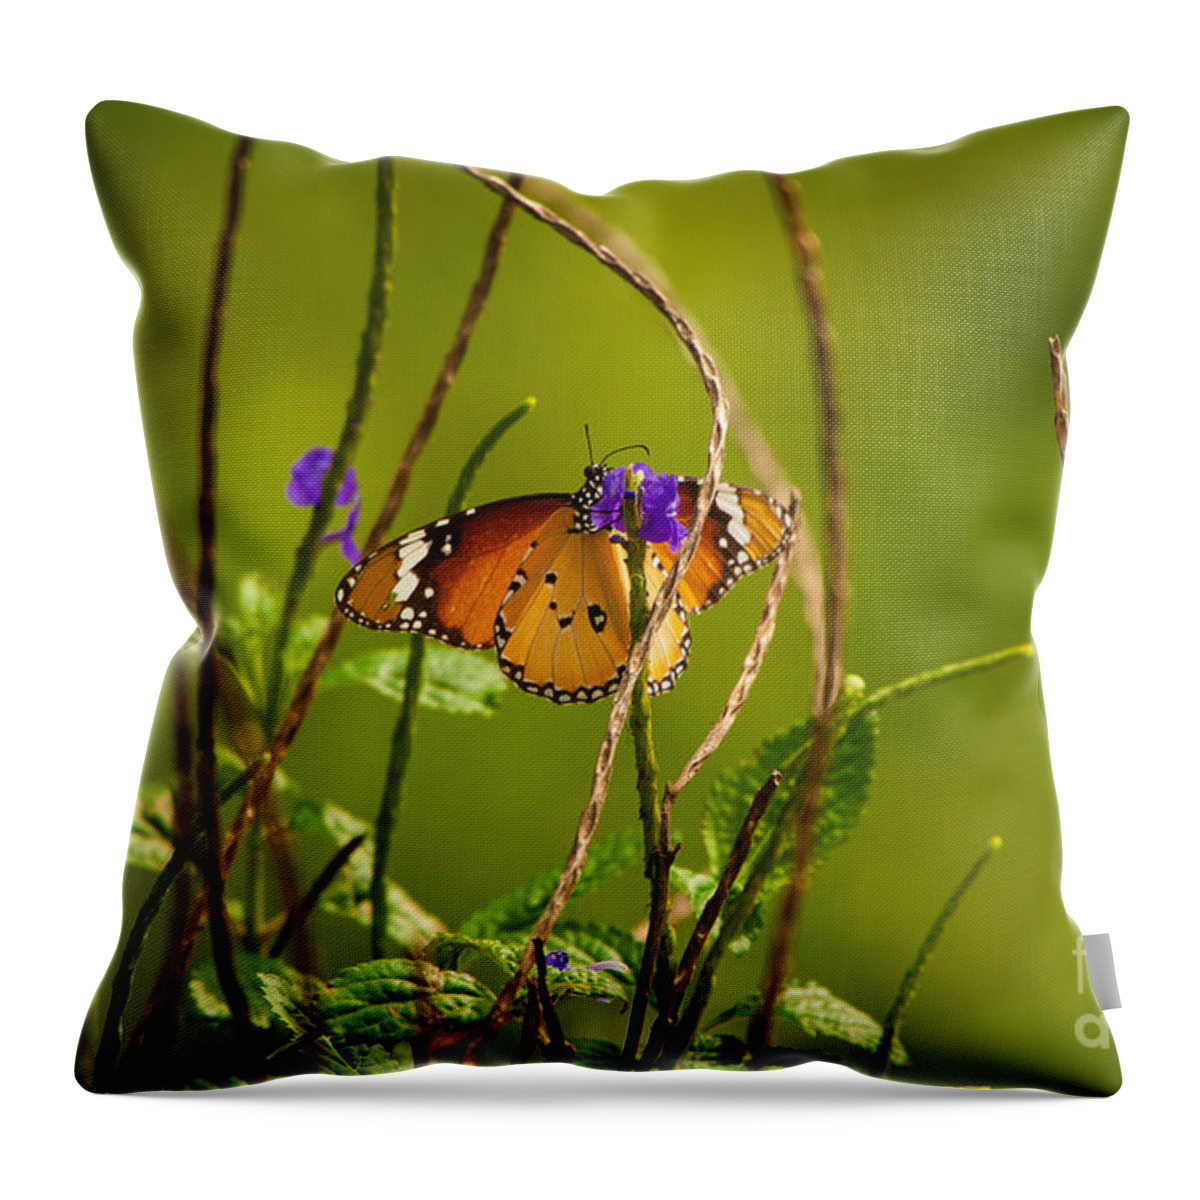 Beautiful Butterfly Photos Throw Pillow featuring the photograph Butterfly and Flower by Venura Herath